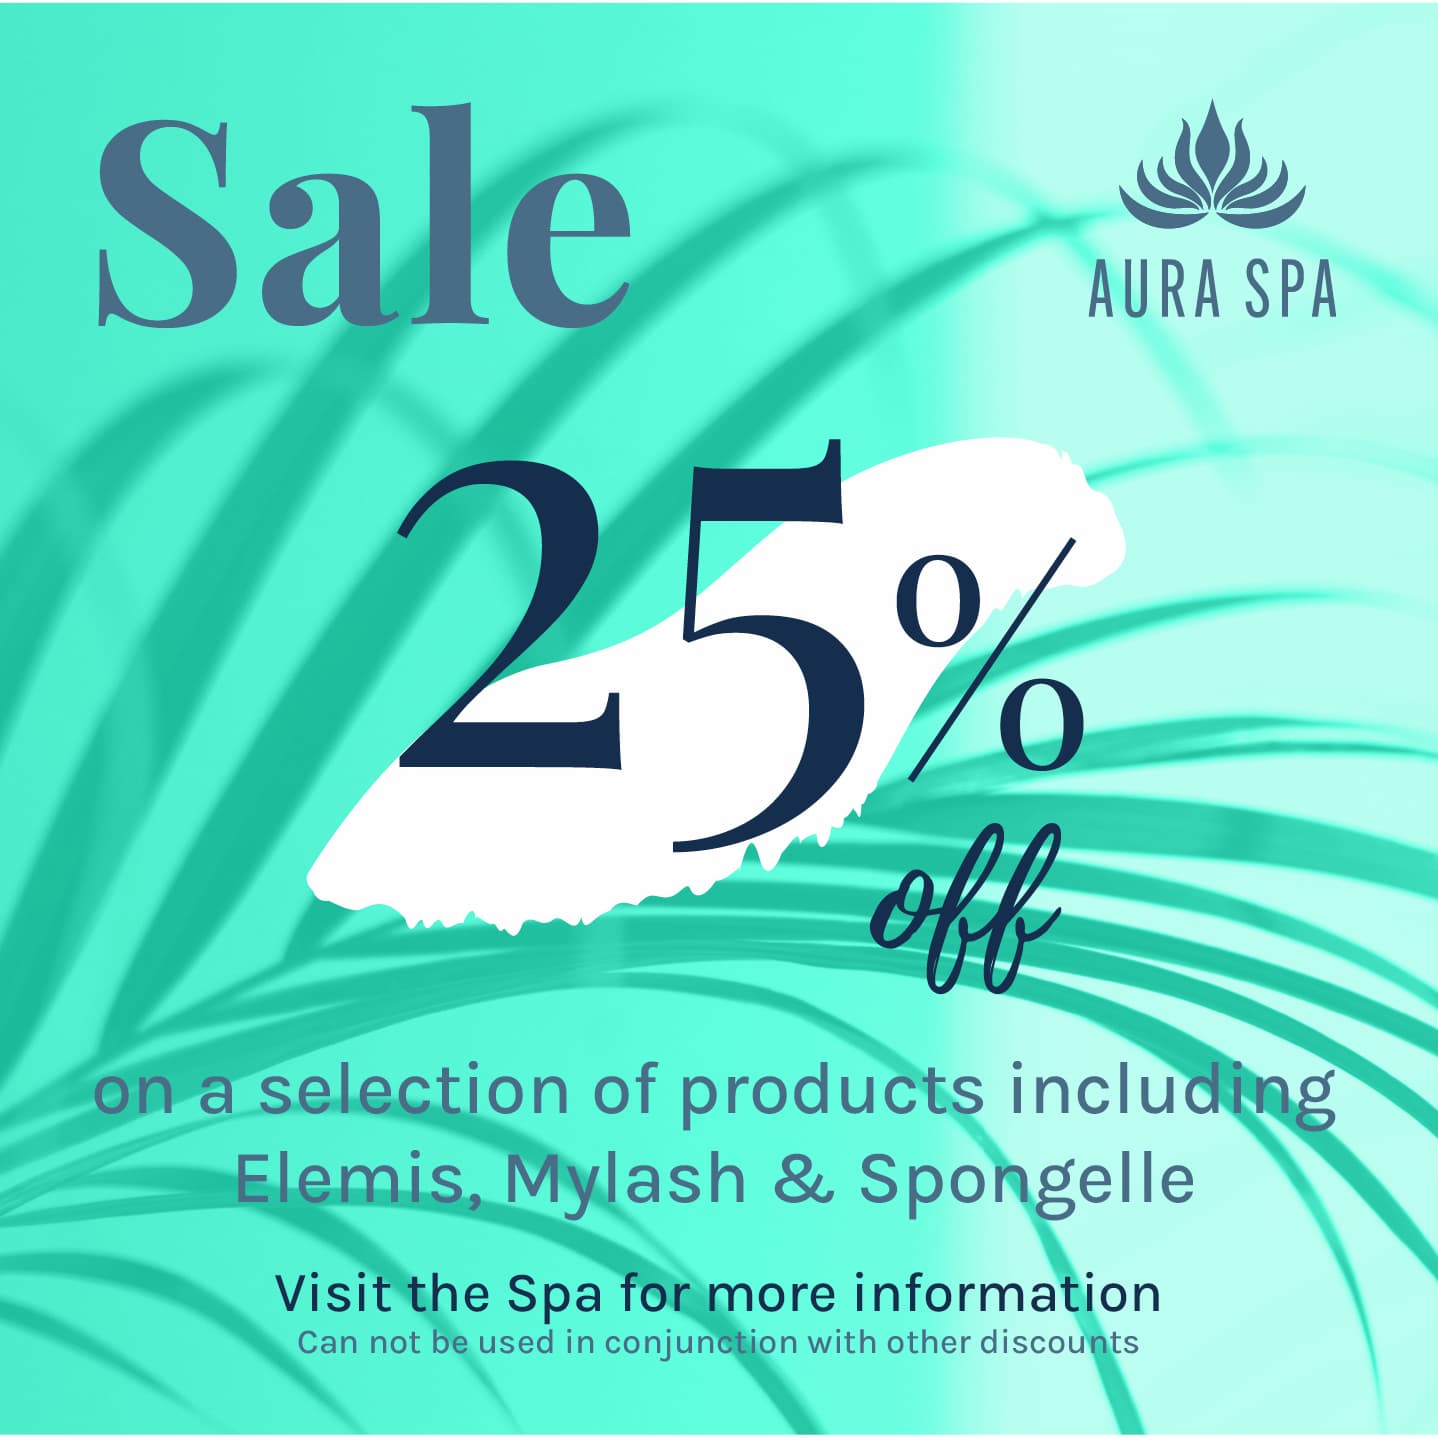 25% off Aura Spa products sale